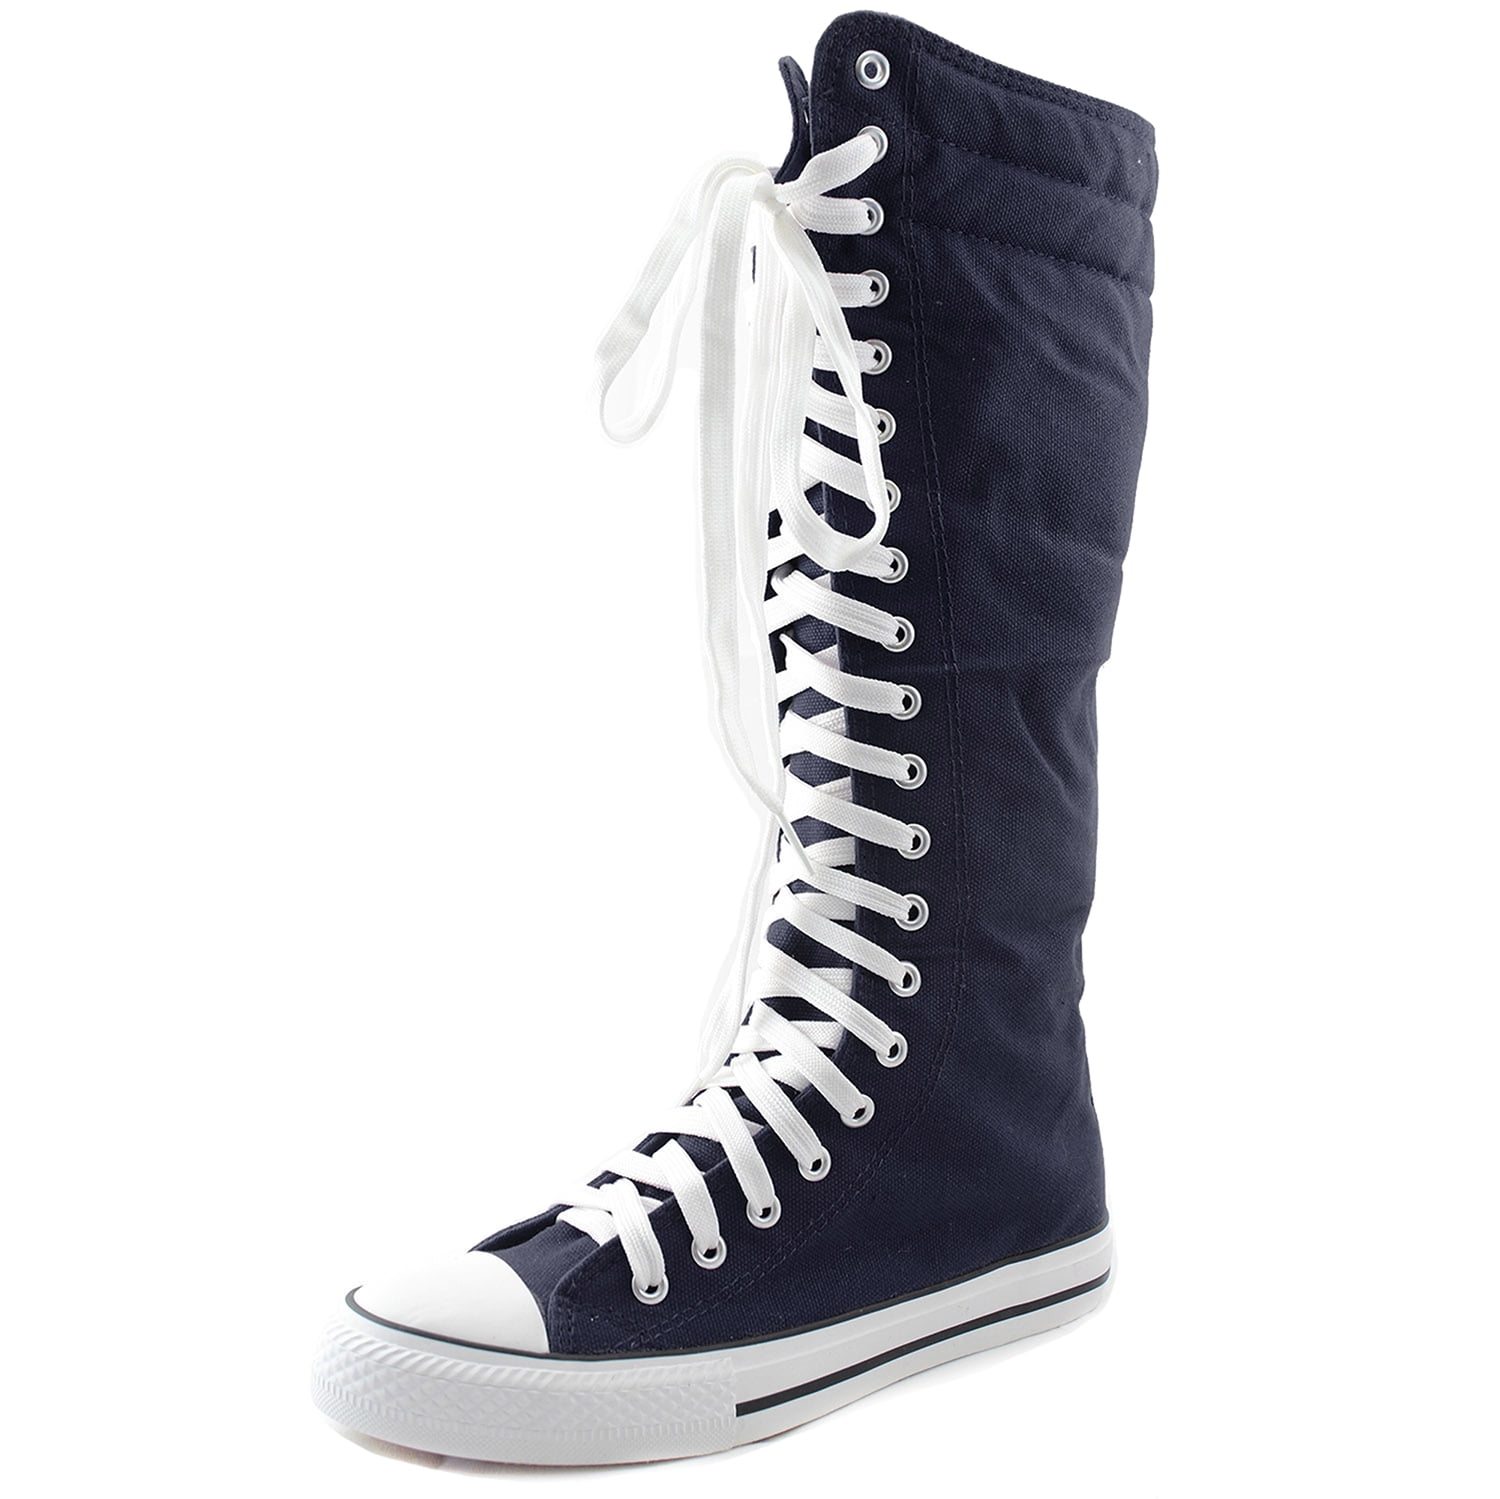 knee high sneakers cheap